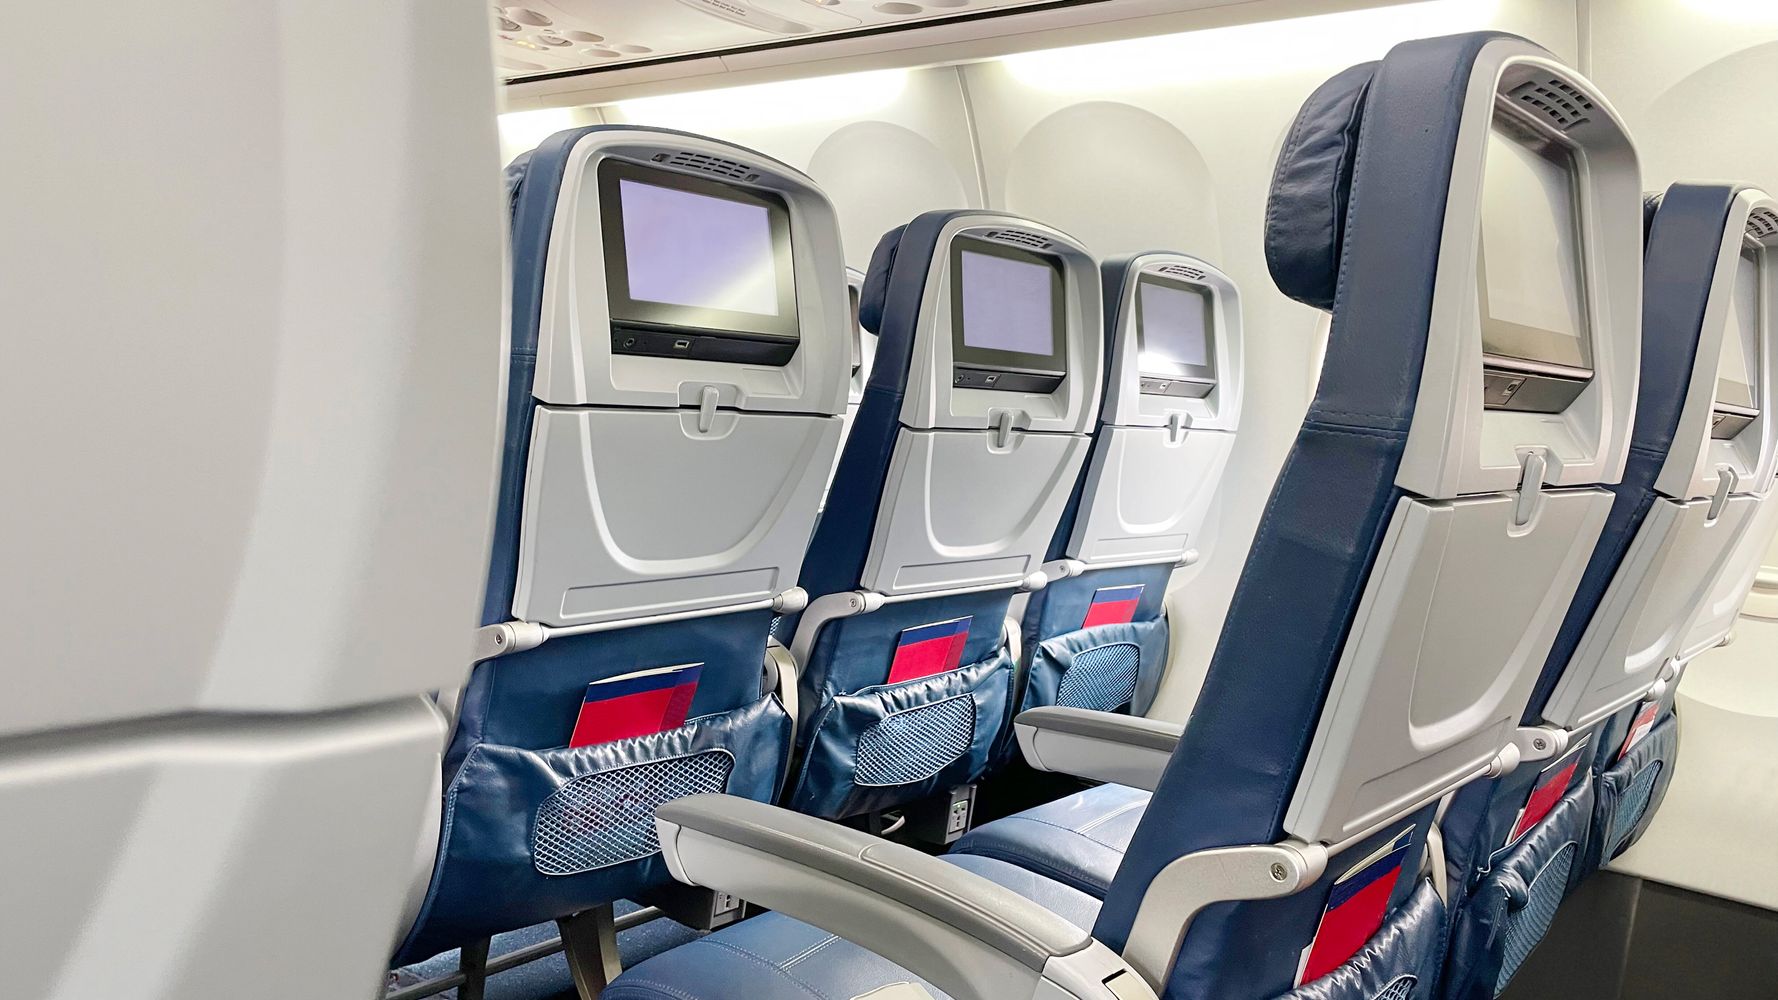 The Best Economy Seat To Book For A Long-Haul Flight